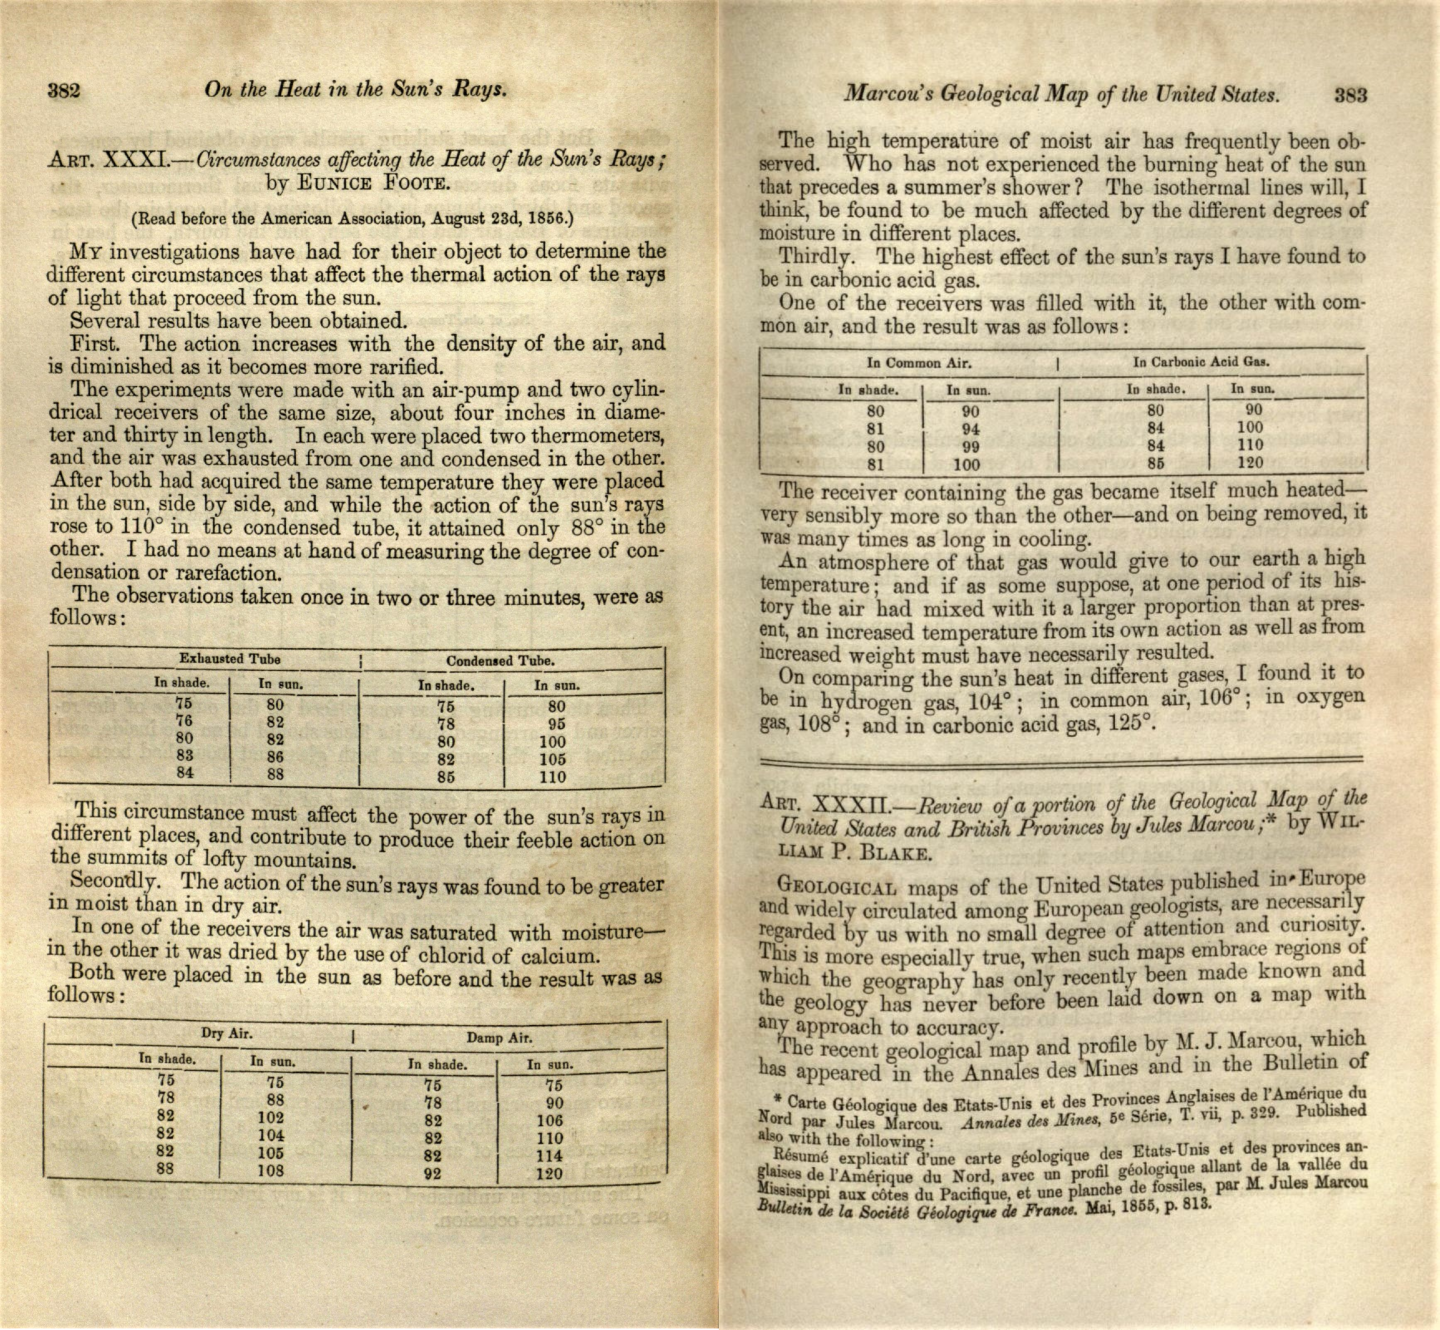 Notes from Eunice Foote's publication on how carbon dioxide increased the temperature inside a glass tube